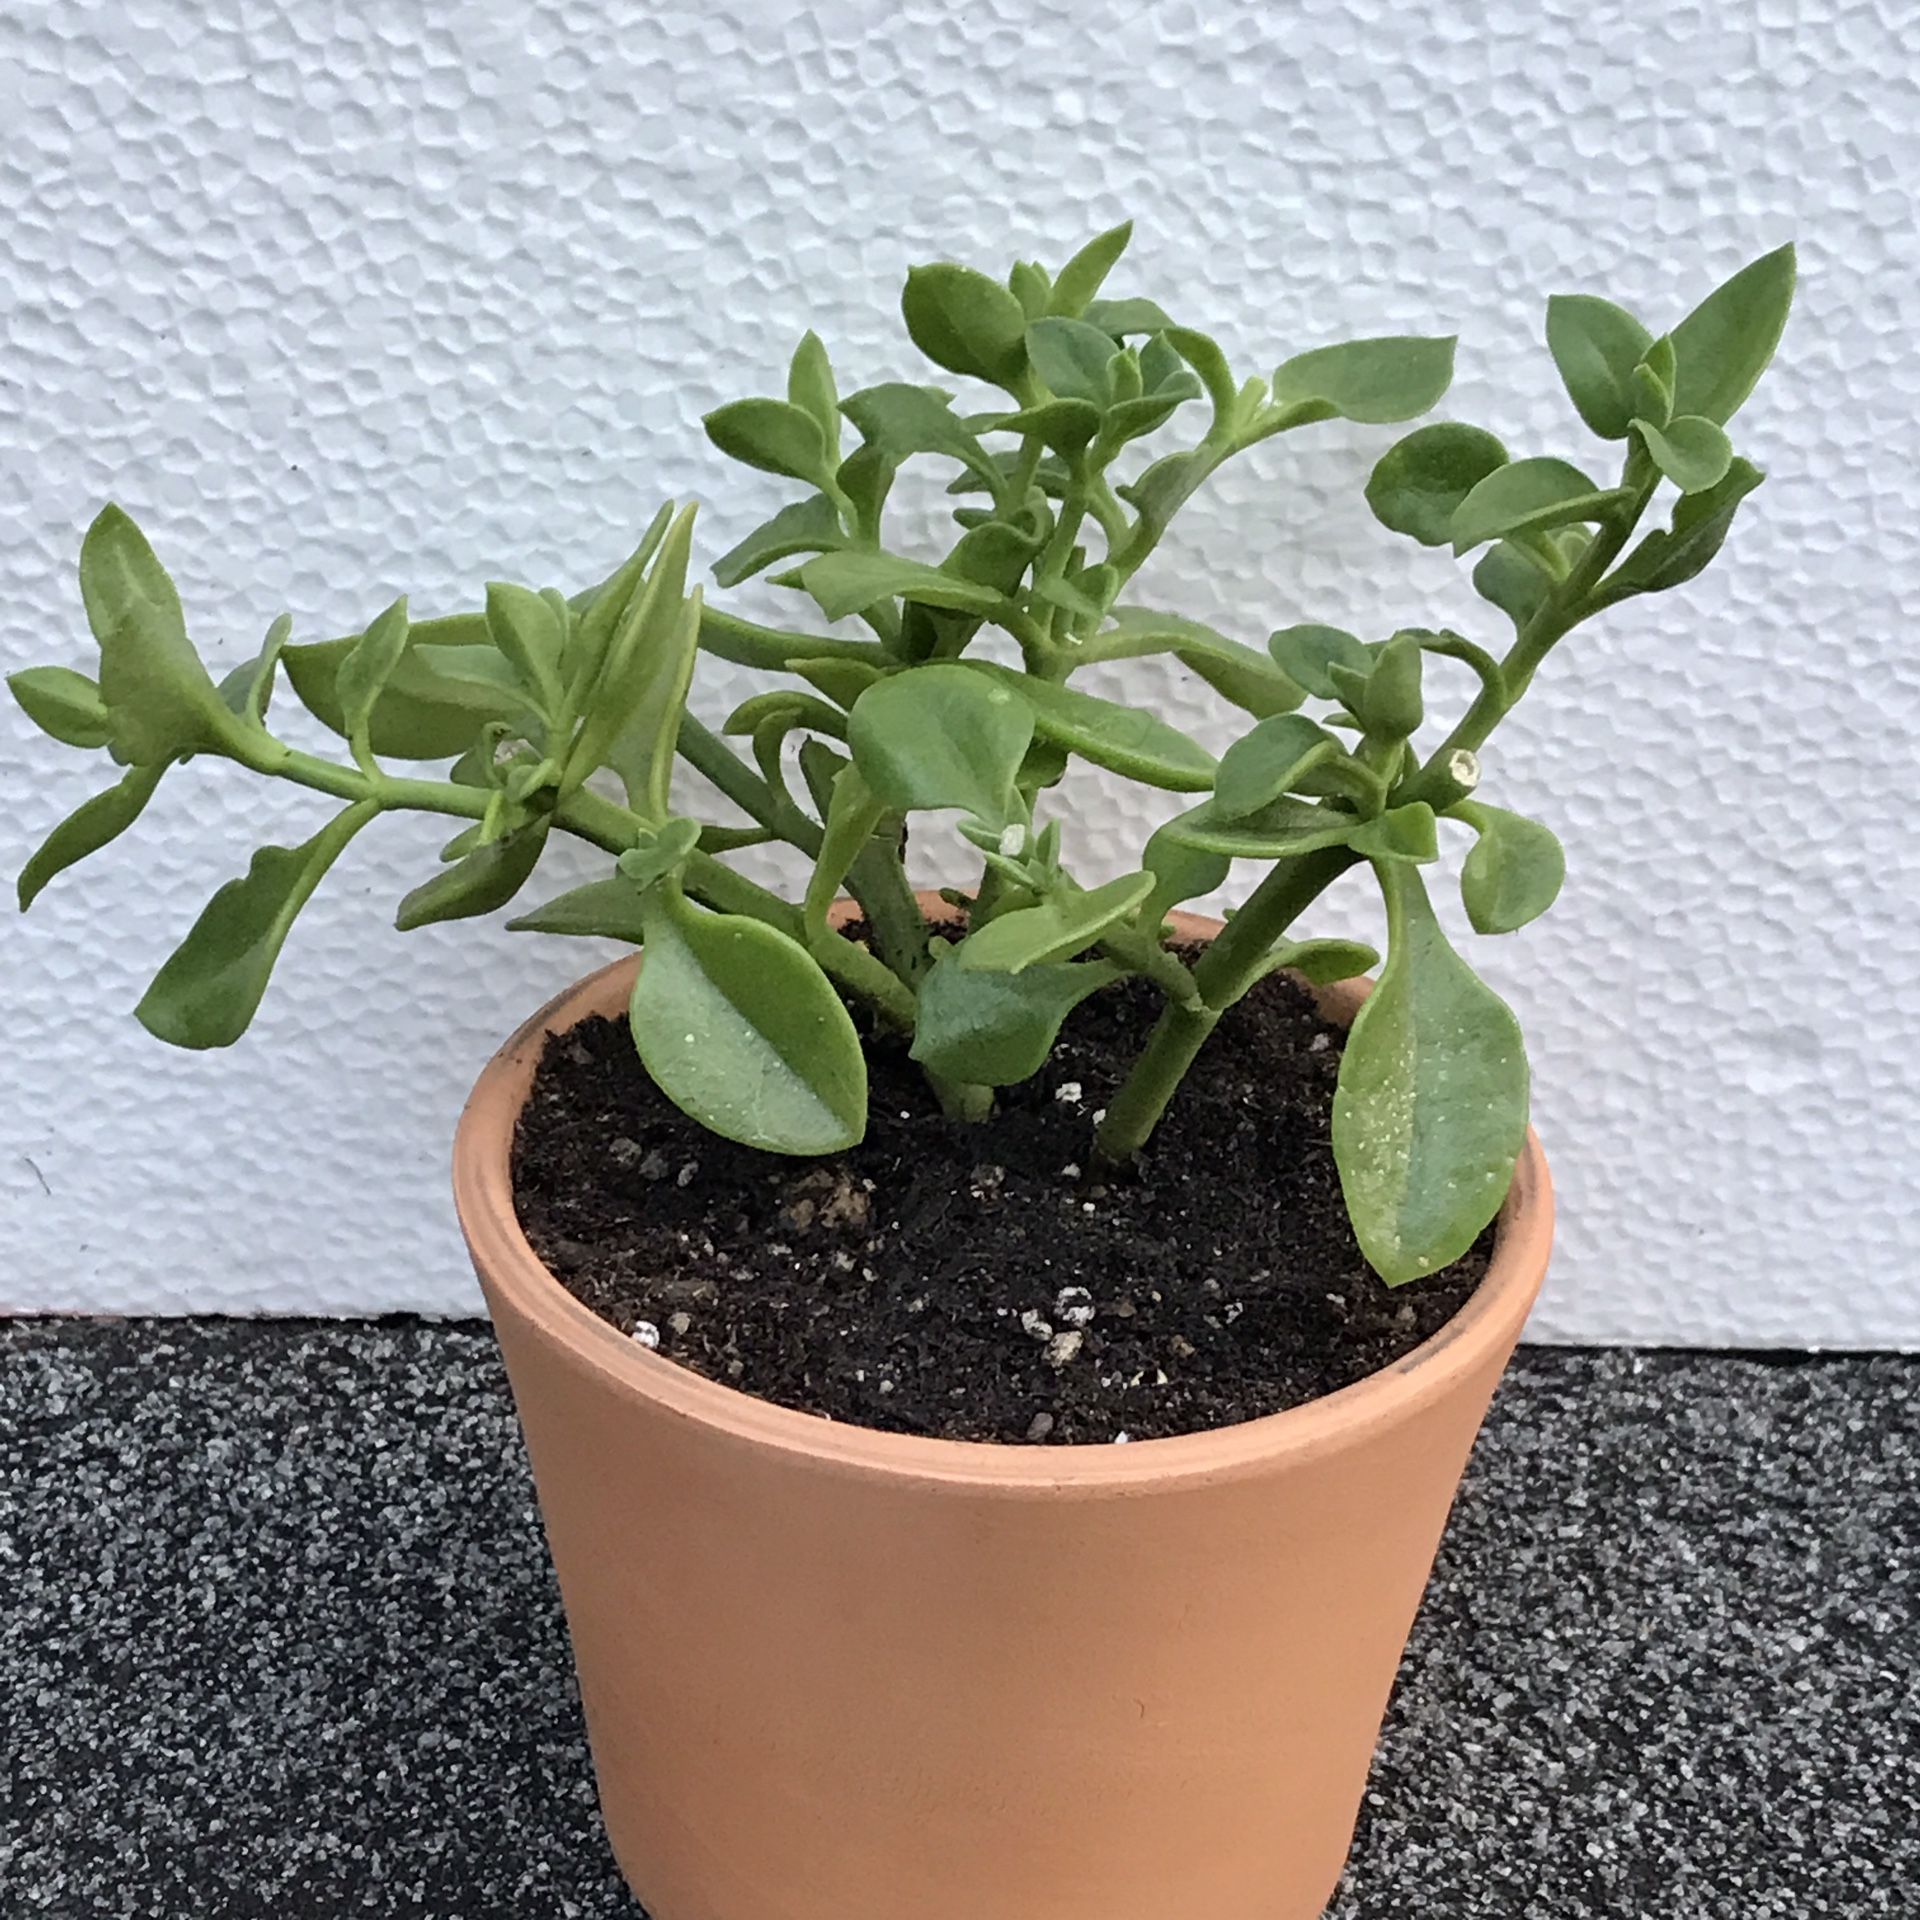 Succulent Red Apple Ice Plant Aptenia in/outdoor in 3.5"H ceramic pot. Will bloom soon.